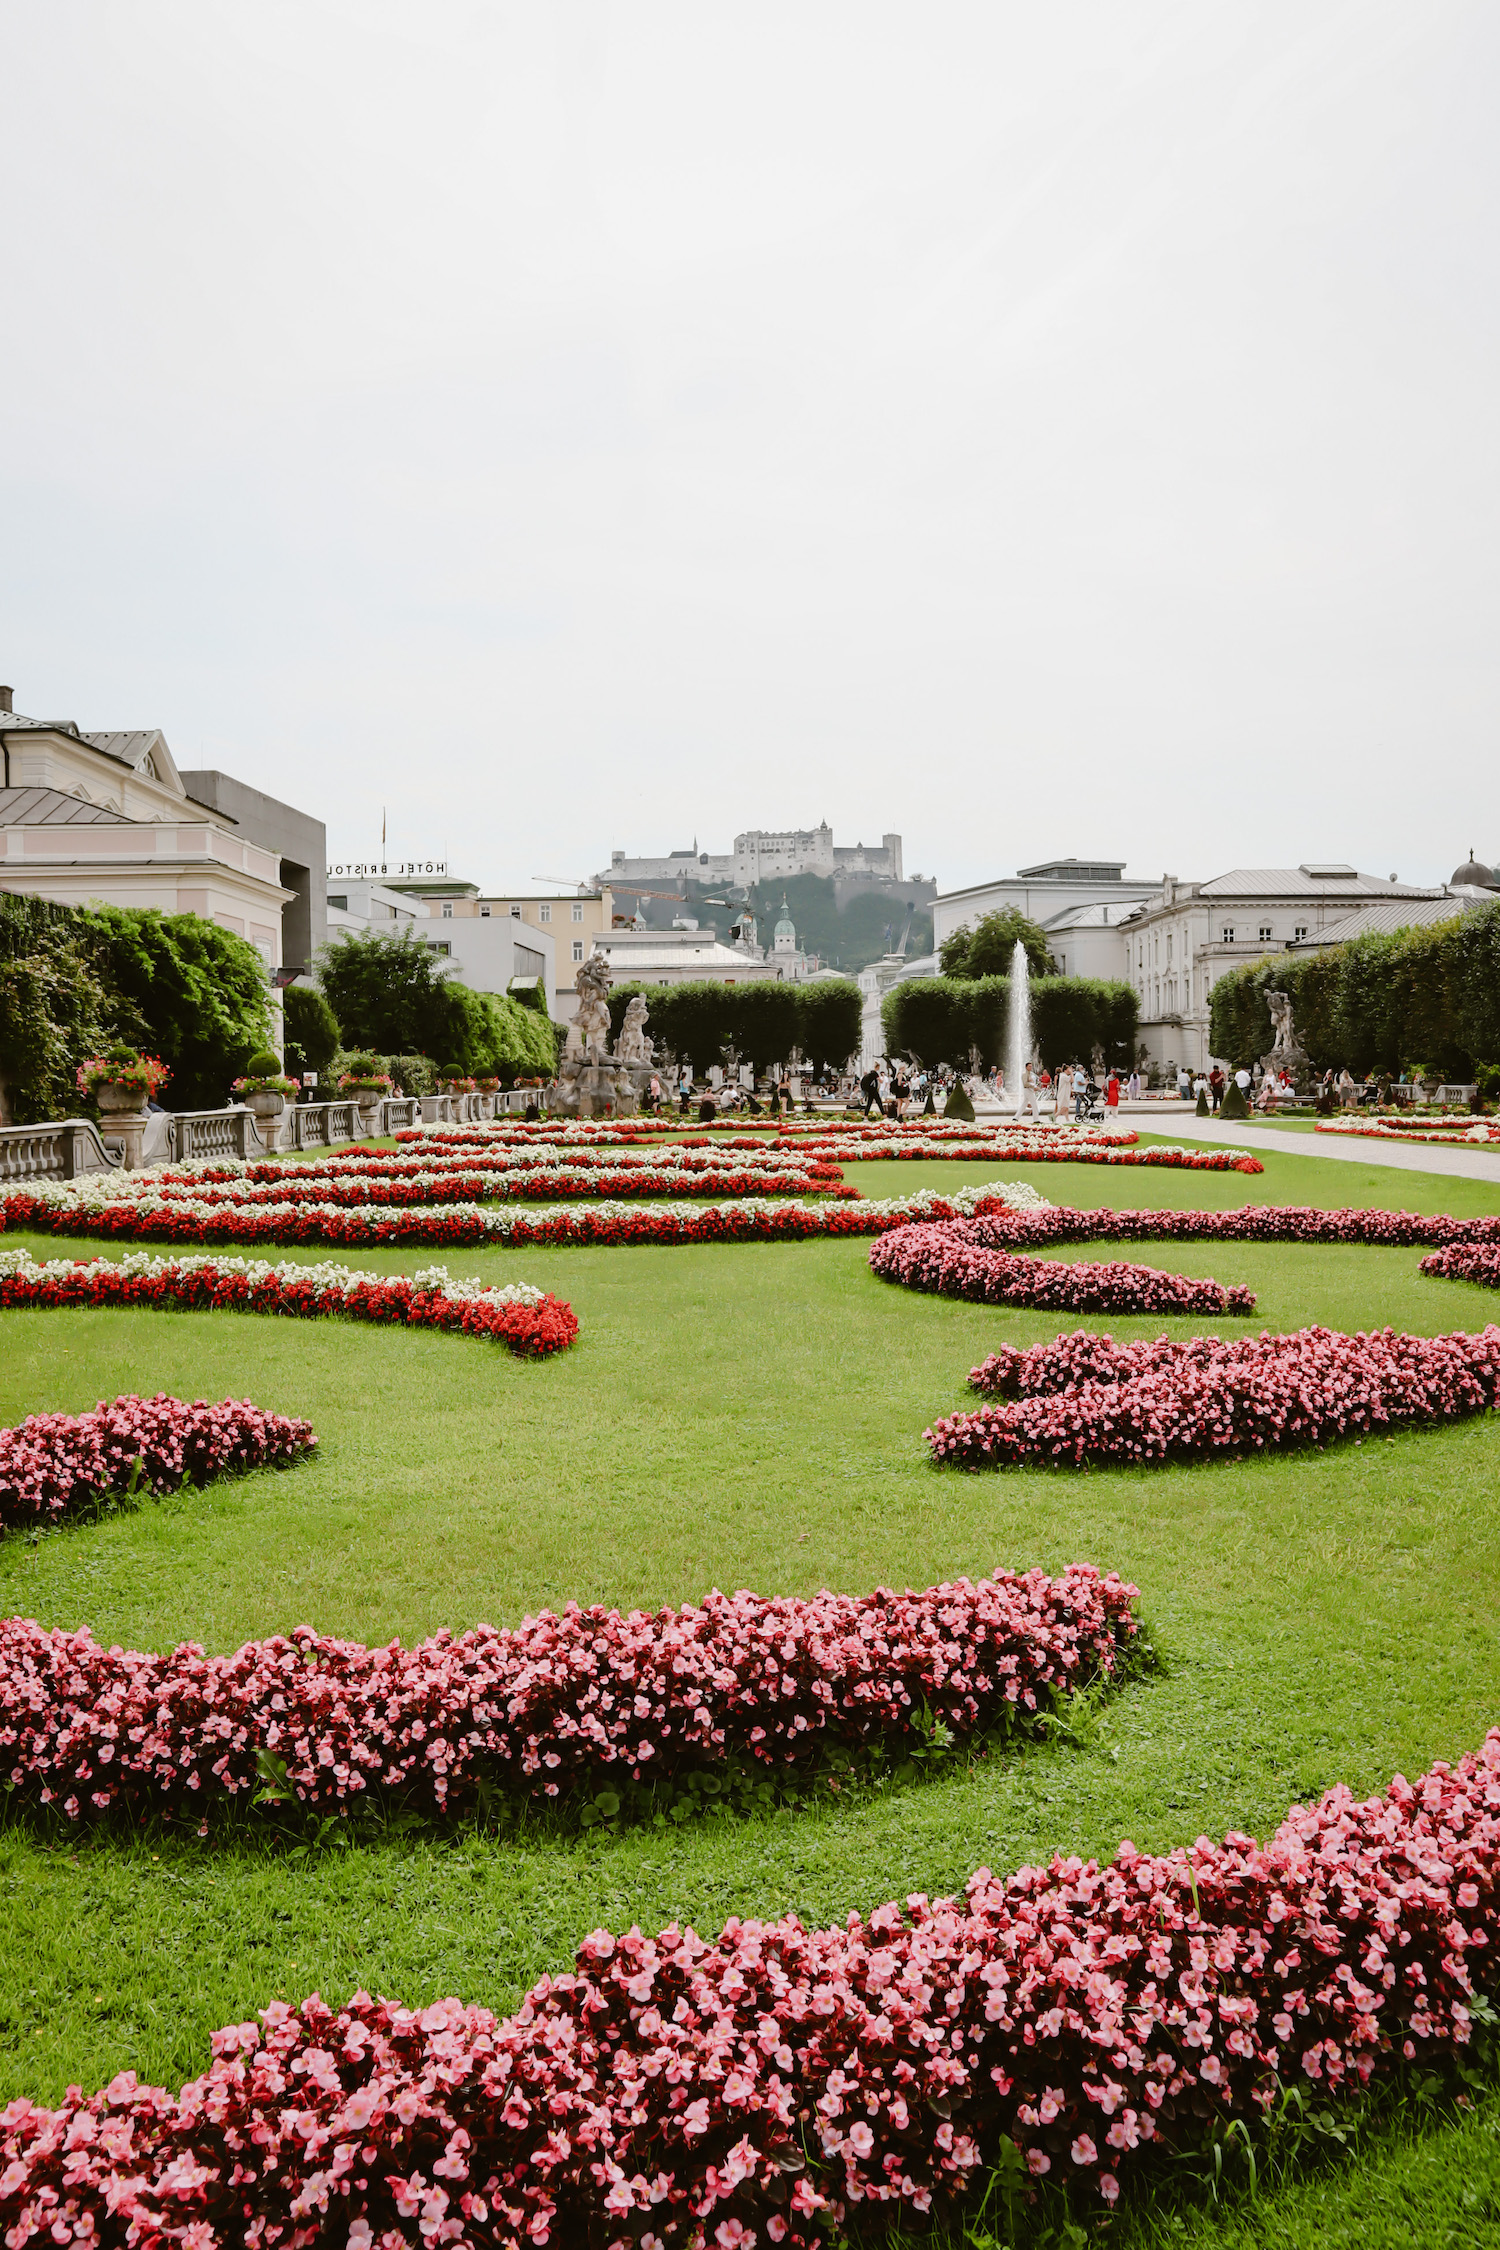 Mirabell Palace & Gardens